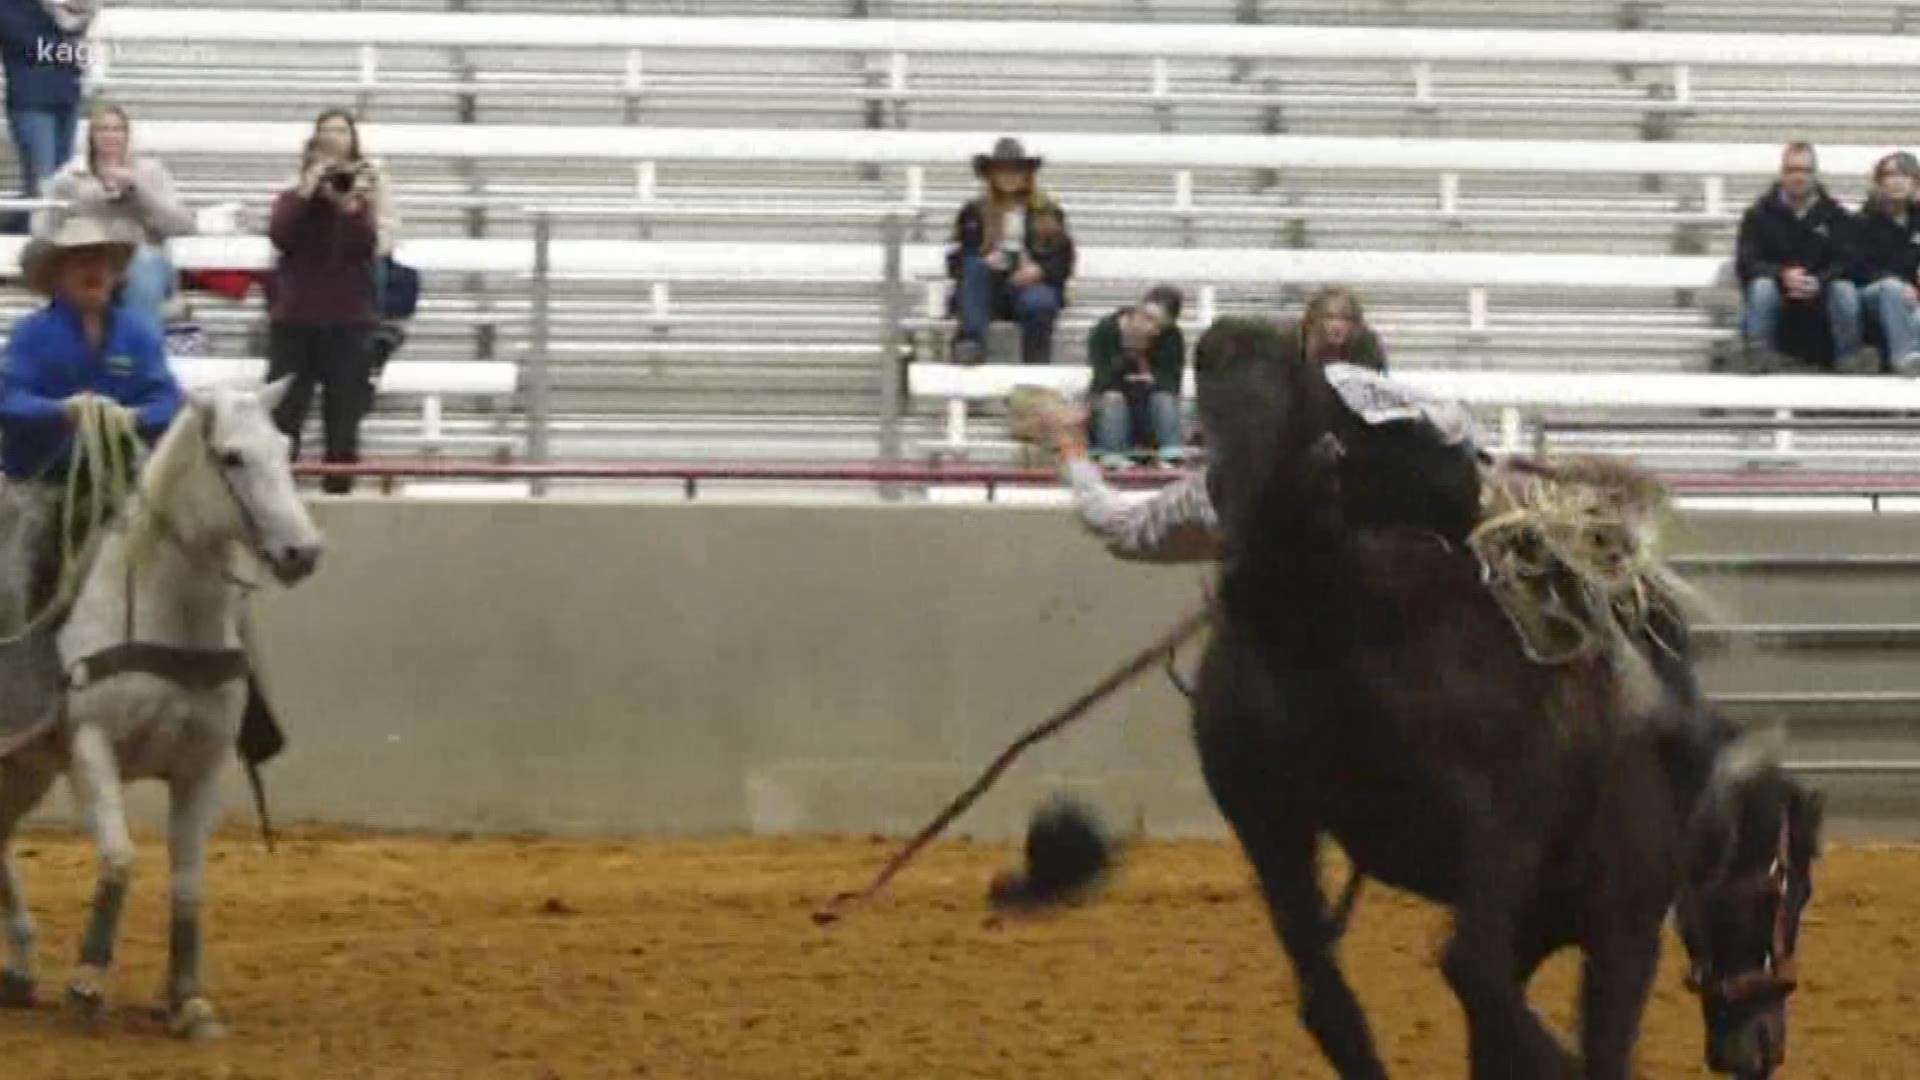 At the Expo Center, the A&M Rodeo team are hosting the NIRA Rodeo and there's a lot on the line.